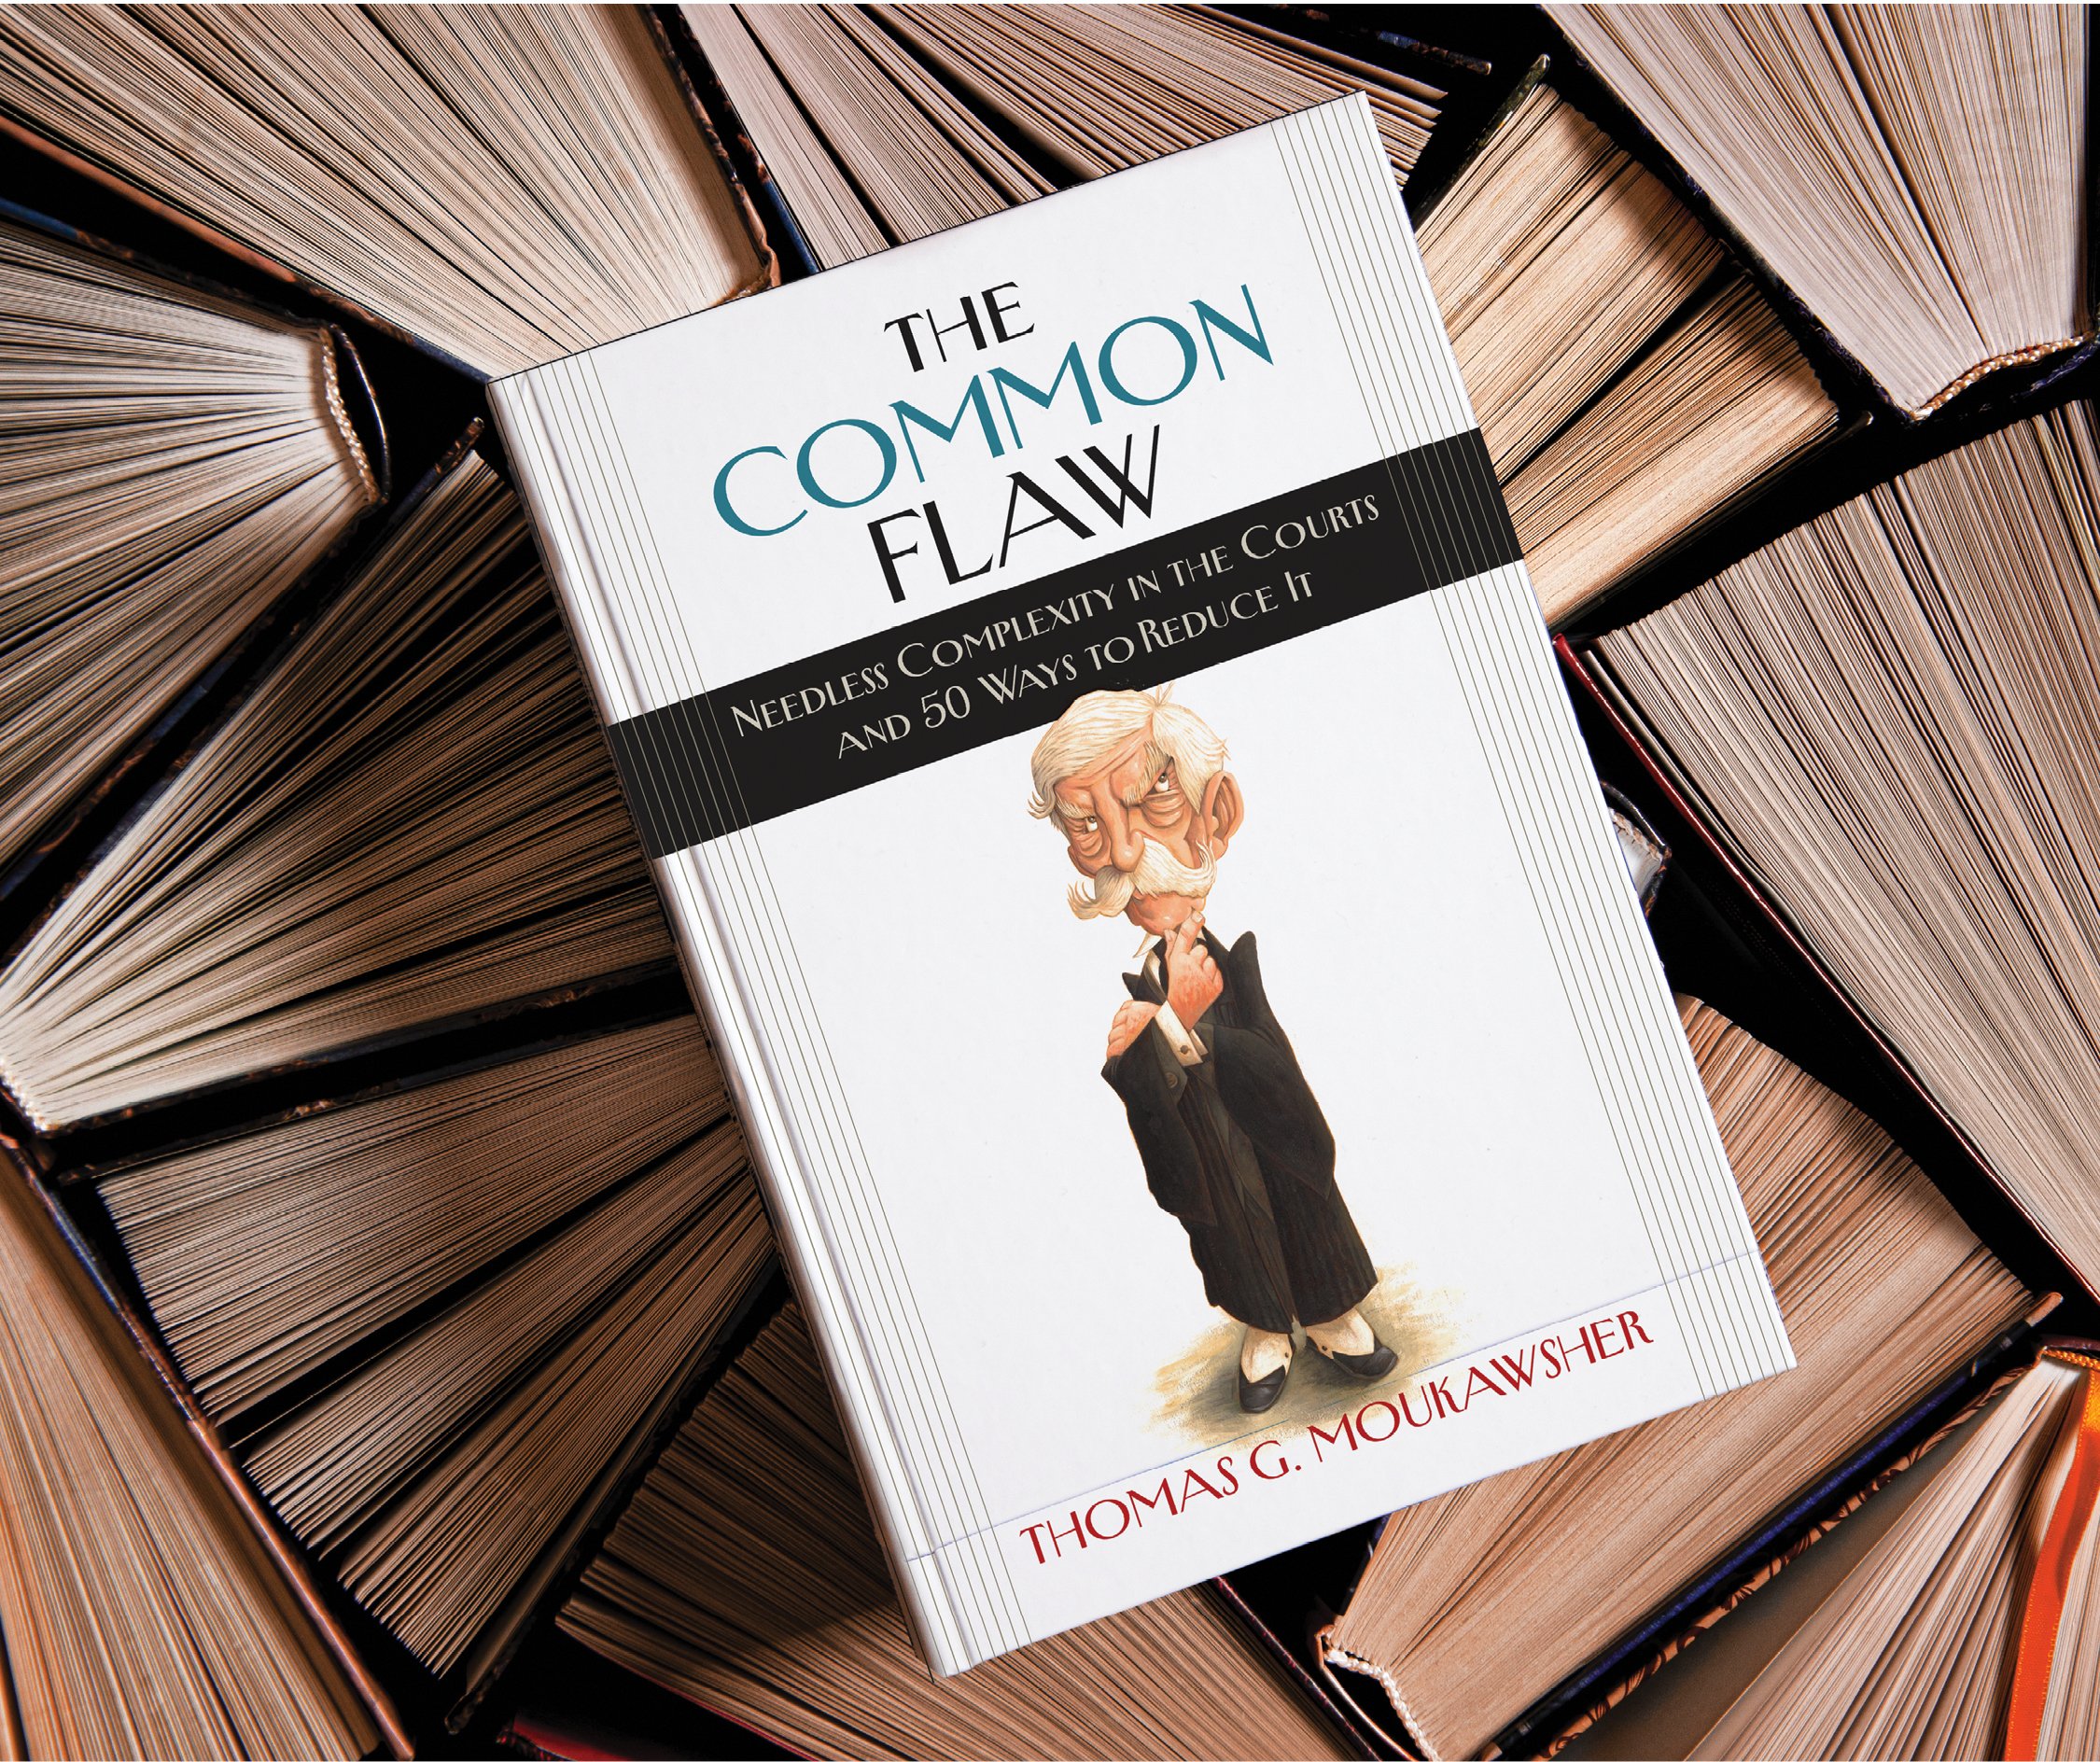 The Common Flaw book cover